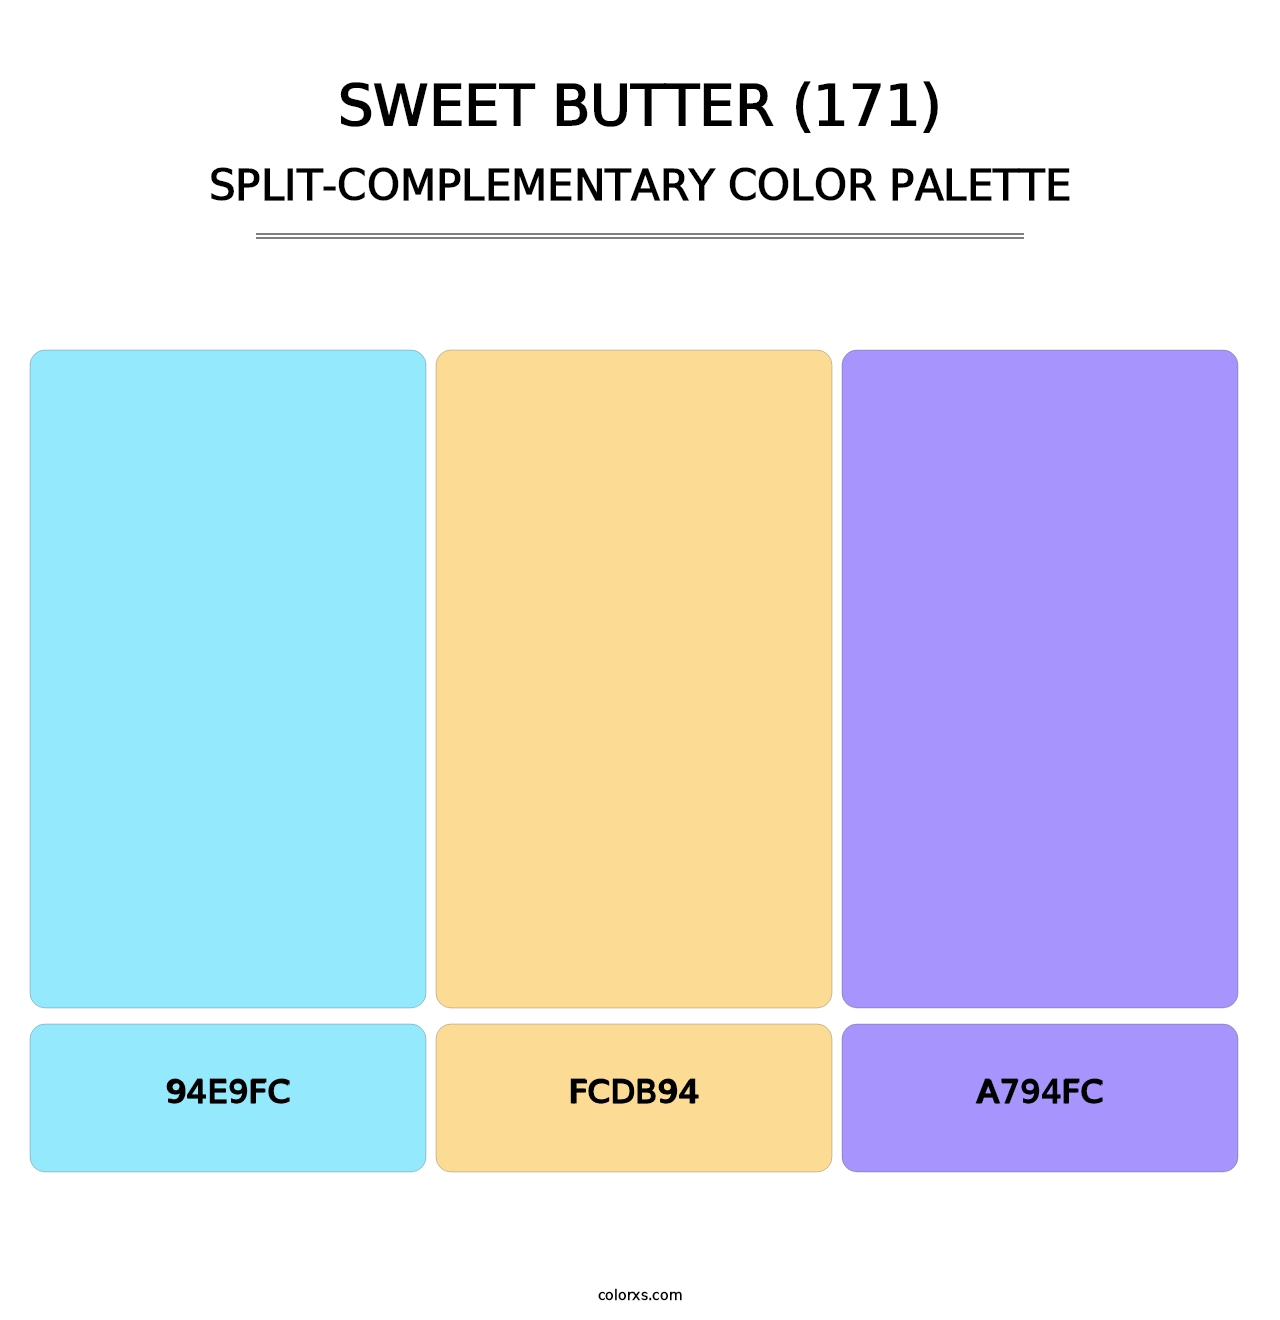 Sweet Butter (171) - Split-Complementary Color Palette